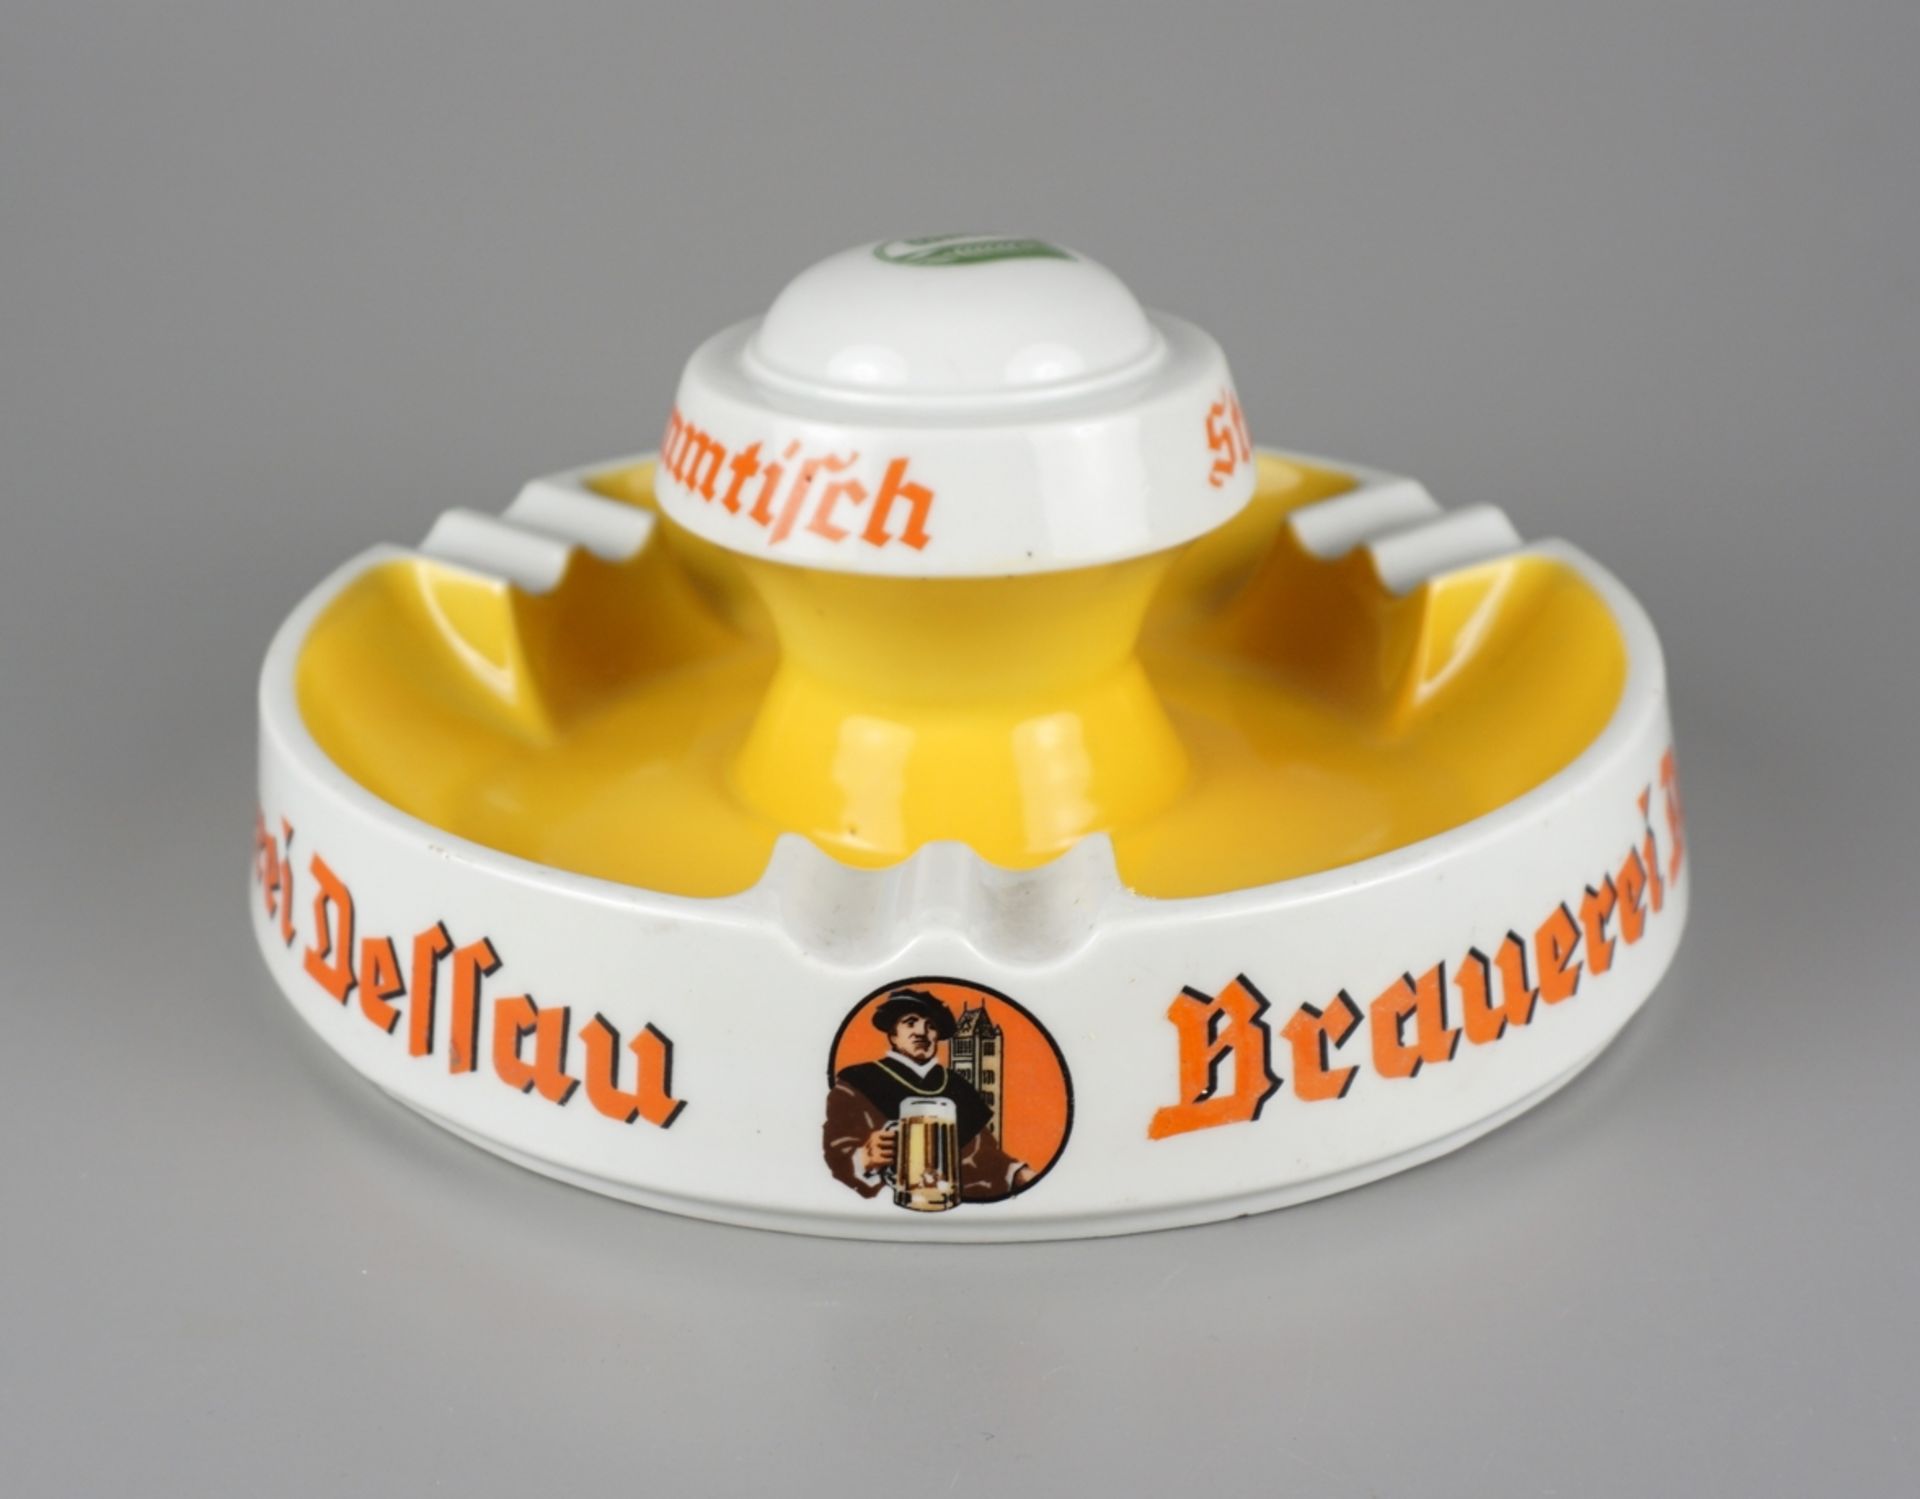 Large regulars` table ashtray "Schultheiß-Brauerei Dessau", GDR, probably 1950s/1960s, d.24cm - Image 2 of 4